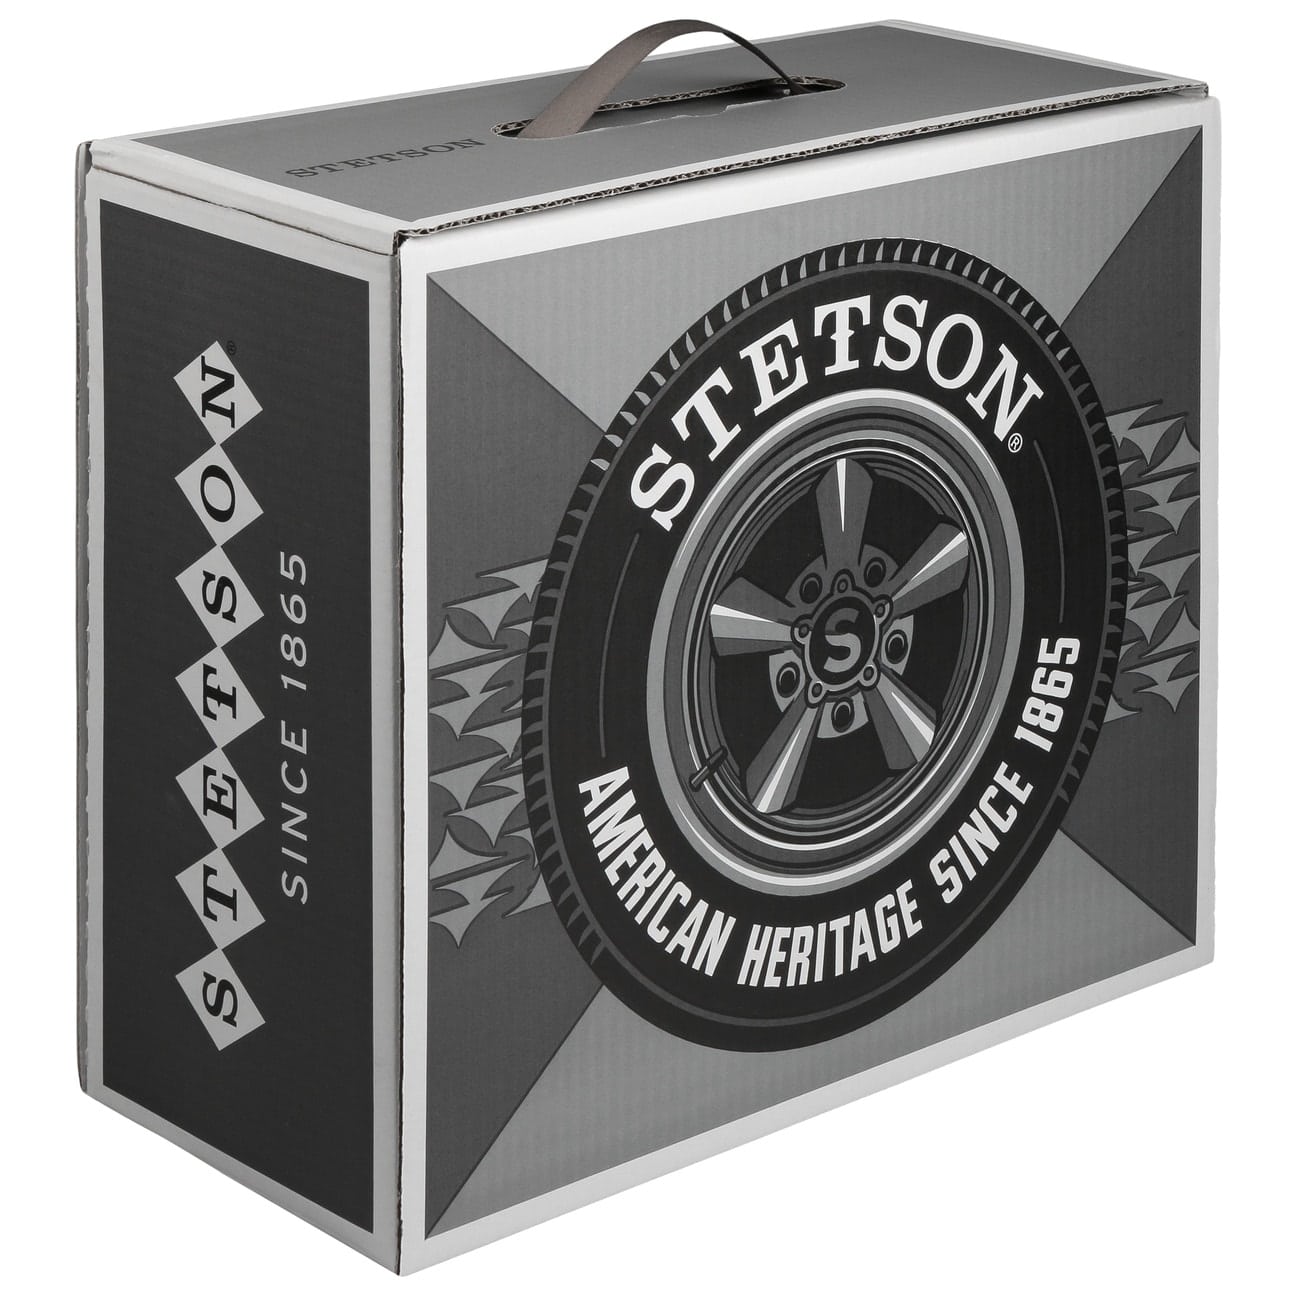 Hoedenbox American Heritage by Stetson 12,95 €